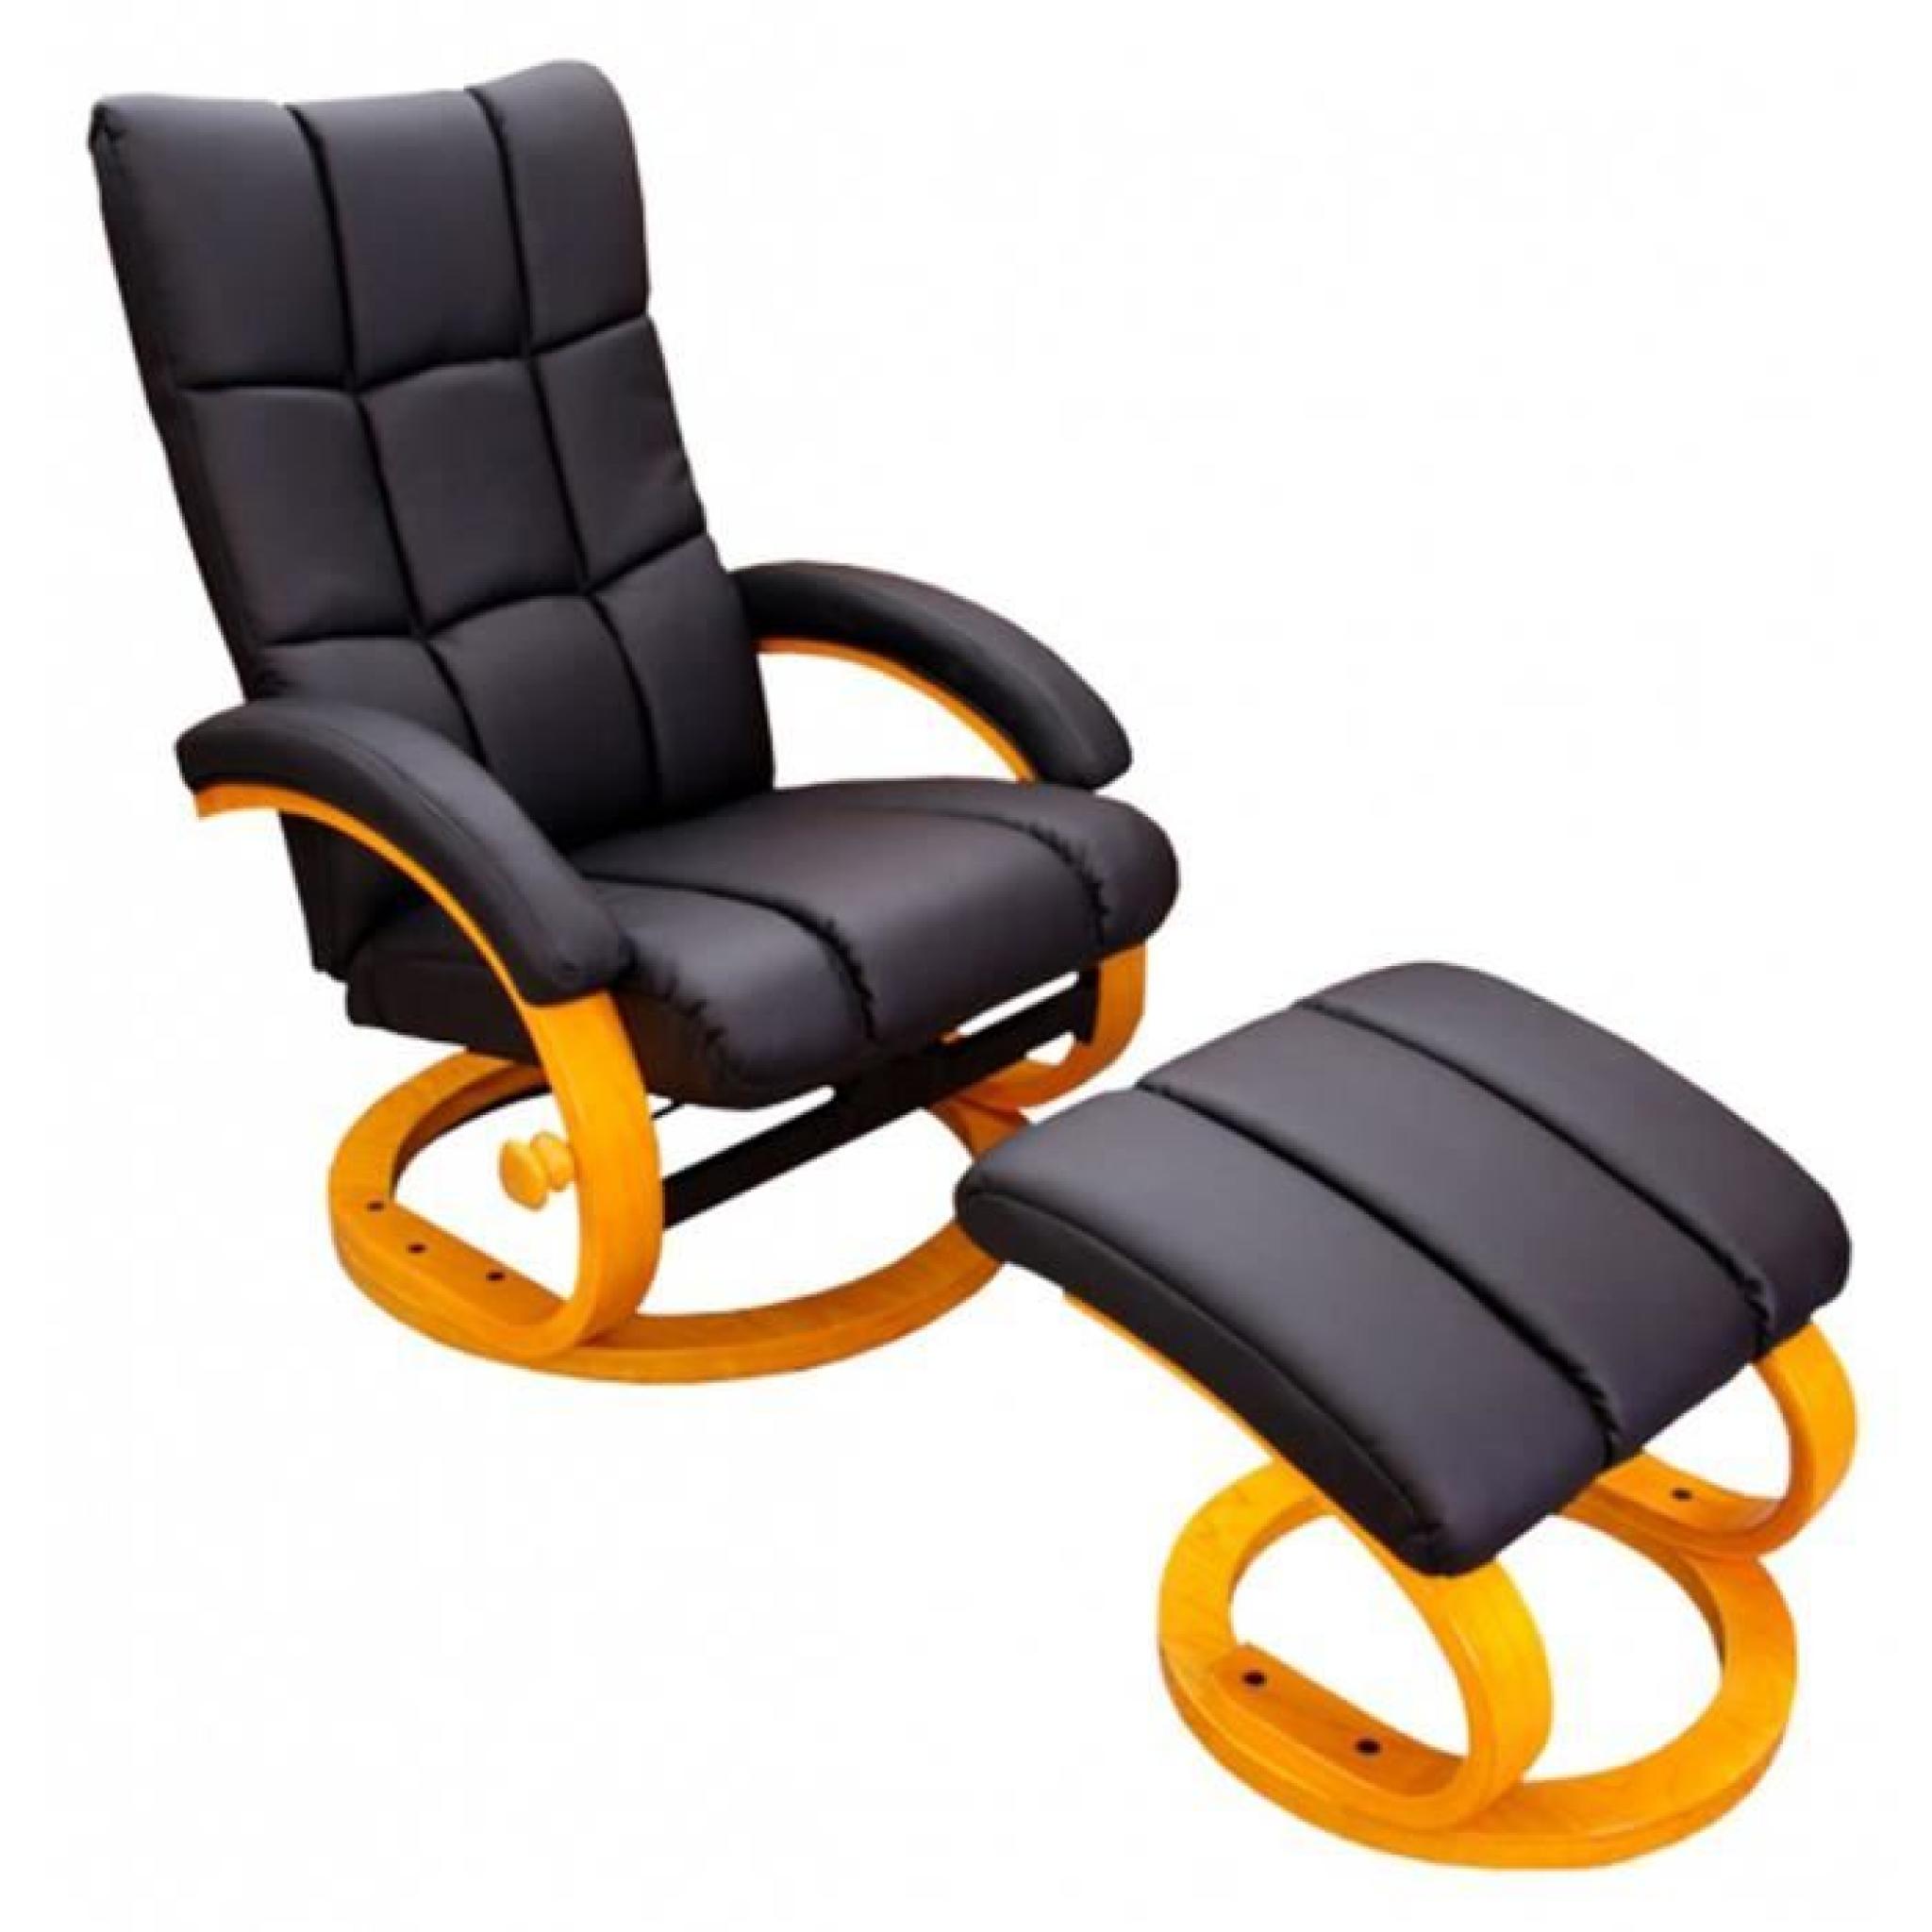 Chaise relax Inclinable avec repose-pieds, Noir